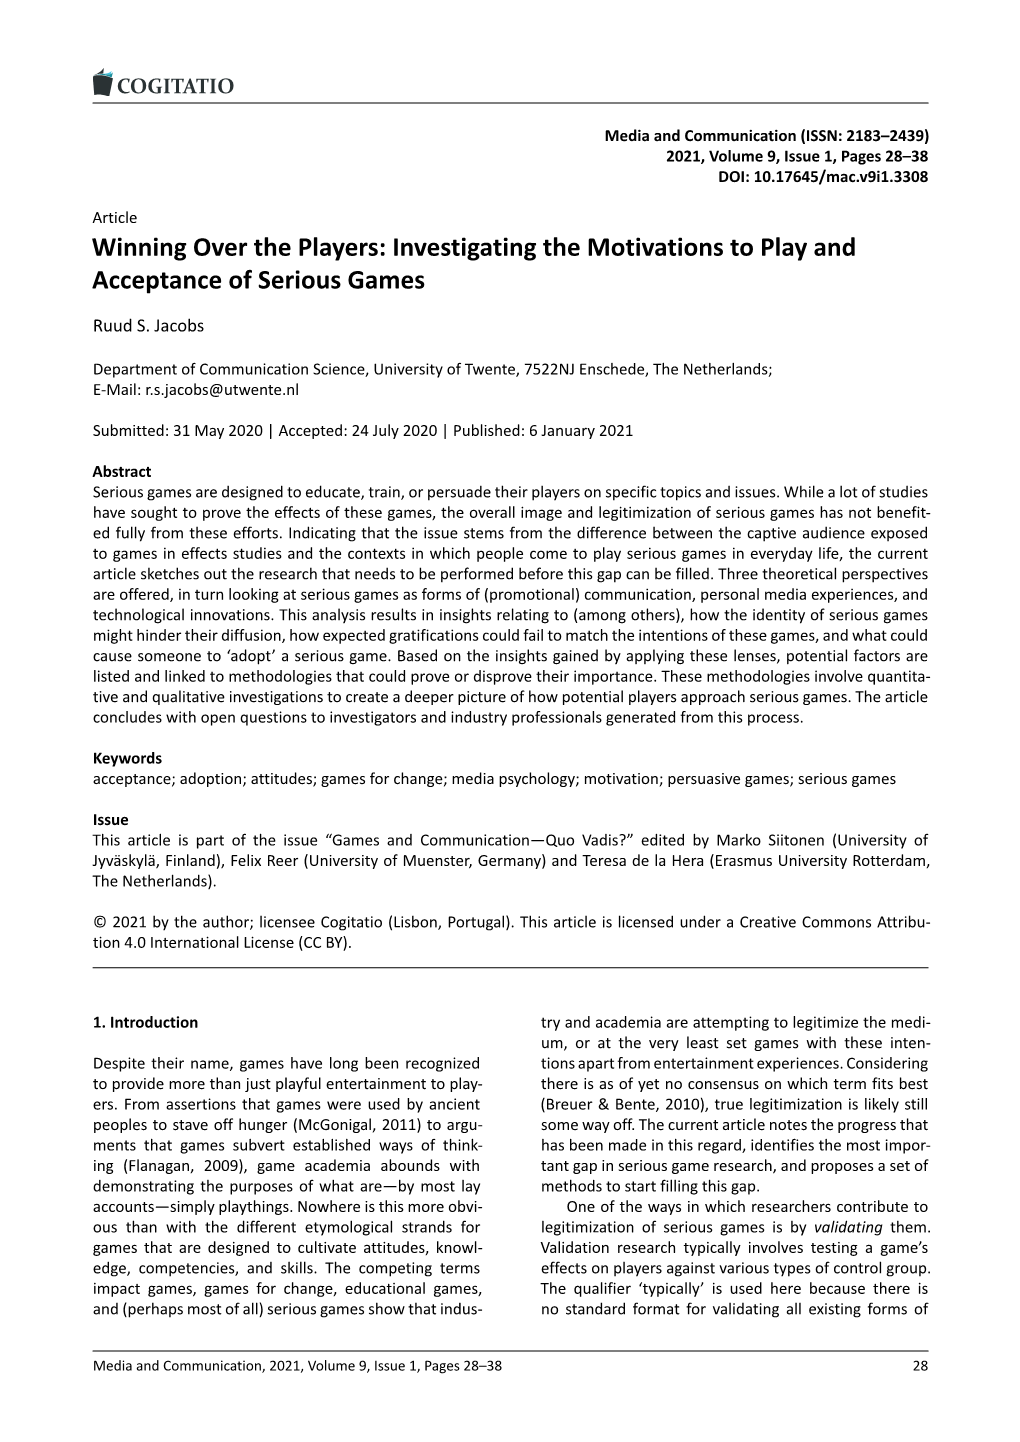 Investigating the Motivations to Play and Acceptance of Serious Games